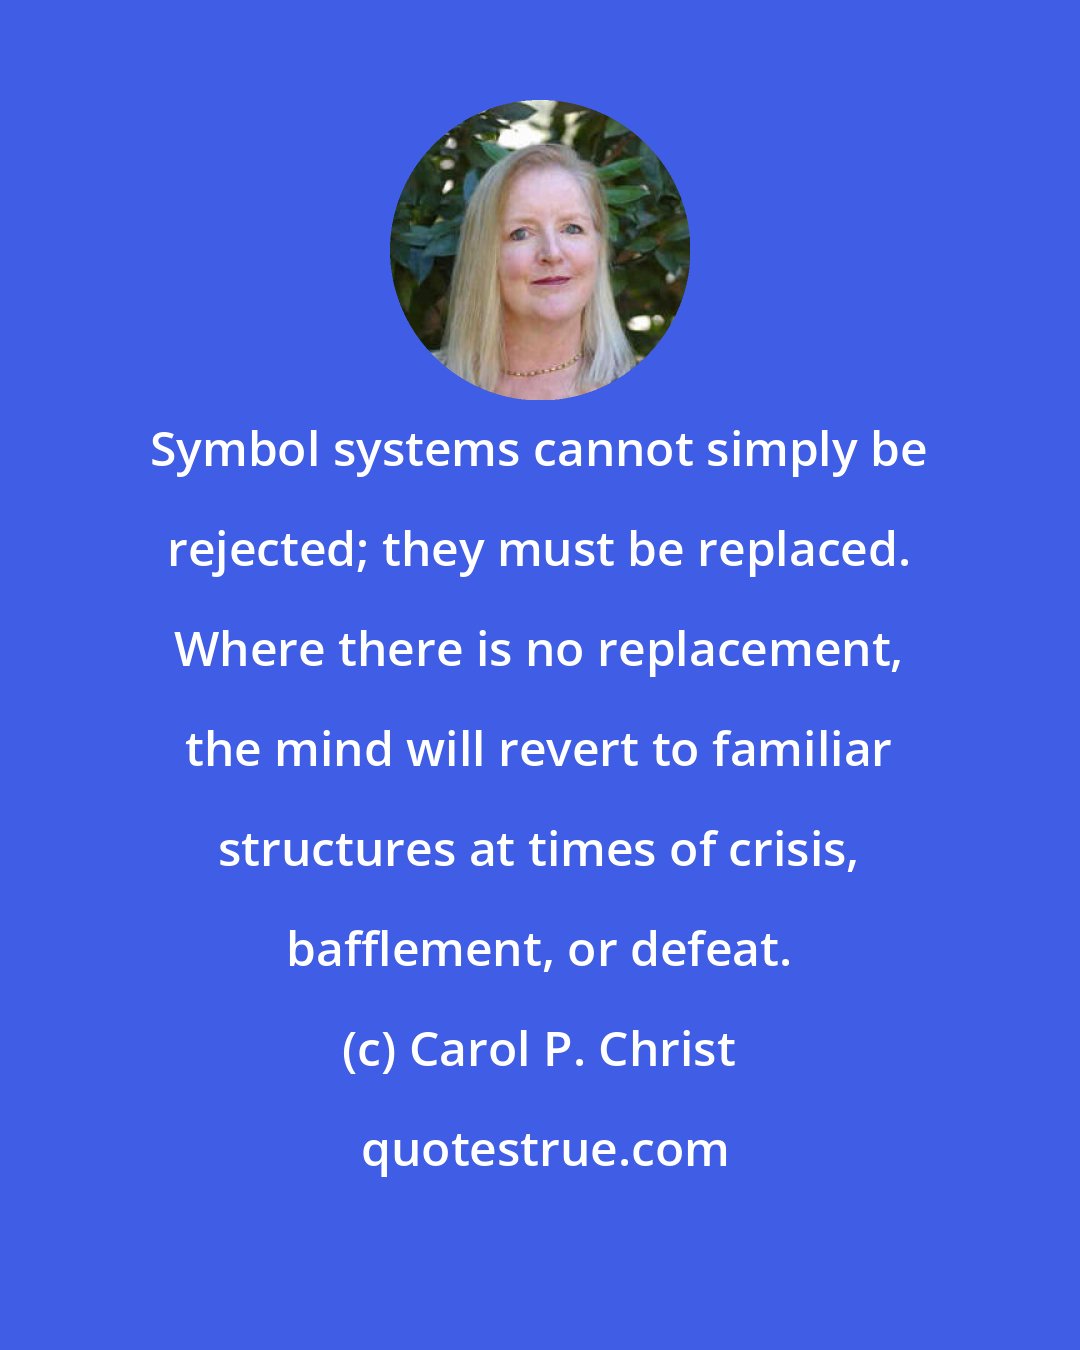 Carol P. Christ: Symbol systems cannot simply be rejected; they must be replaced. Where there is no replacement, the mind will revert to familiar structures at times of crisis, bafflement, or defeat.